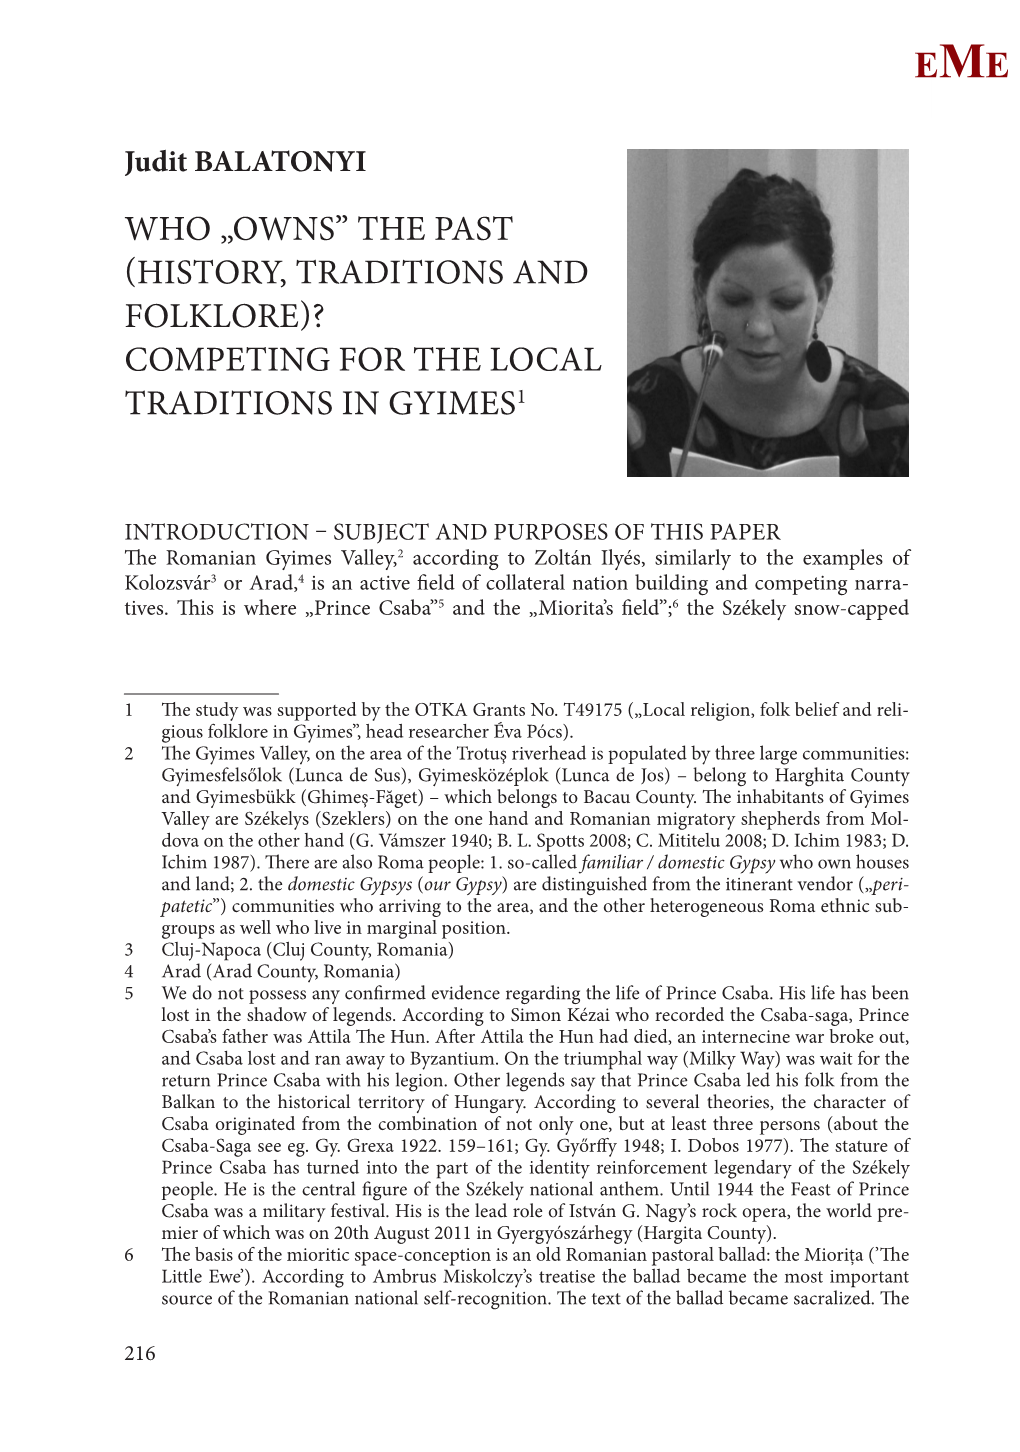 Who „Owns” the Past (History, Traditions and Folklore)? Competing for the Local Traditions in Gyimes1